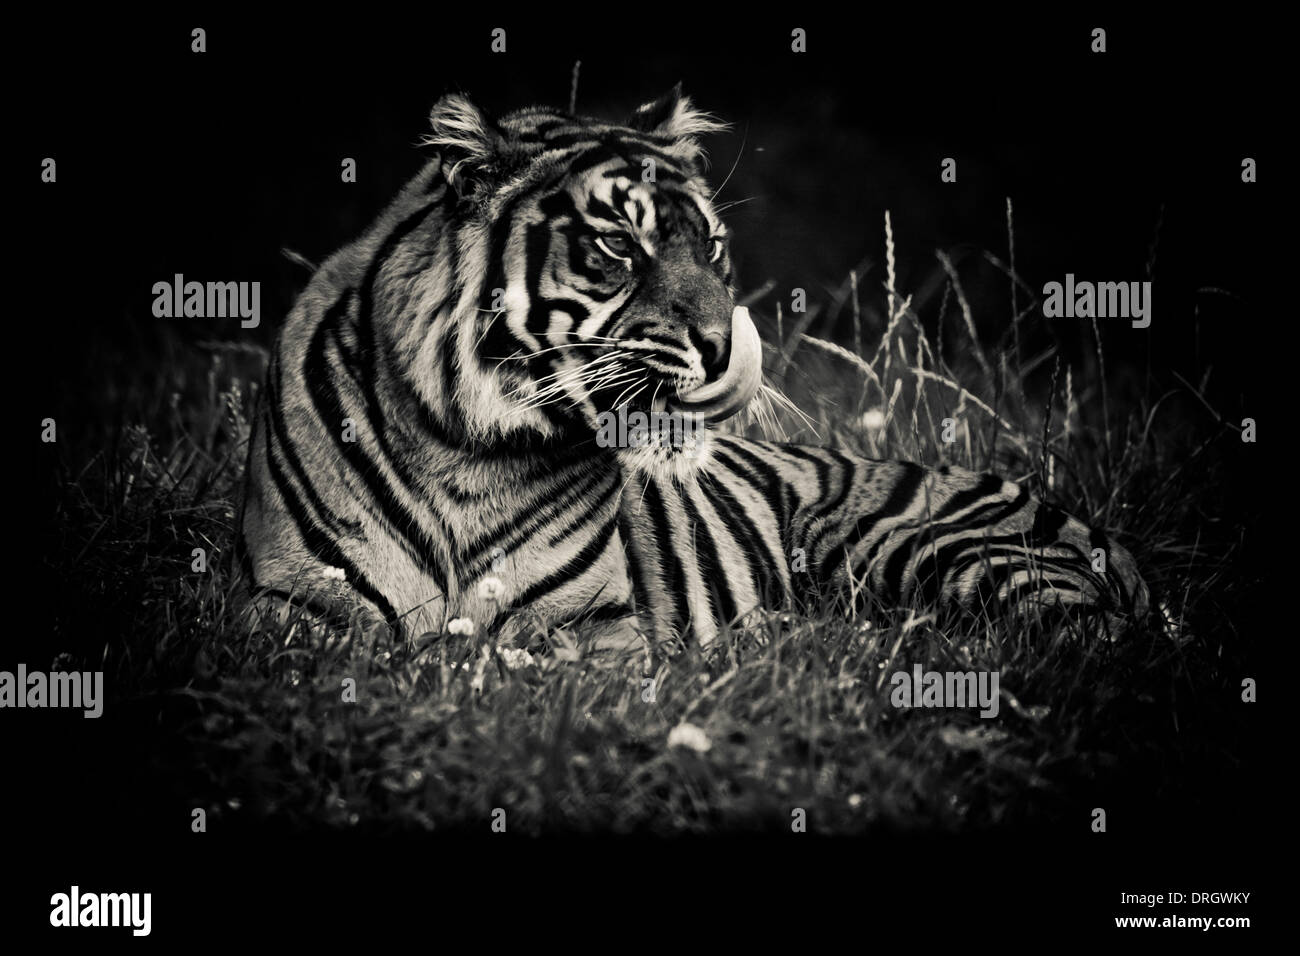 A tiger in the wild at a safari park, sitting waiting and watching Stock Photo